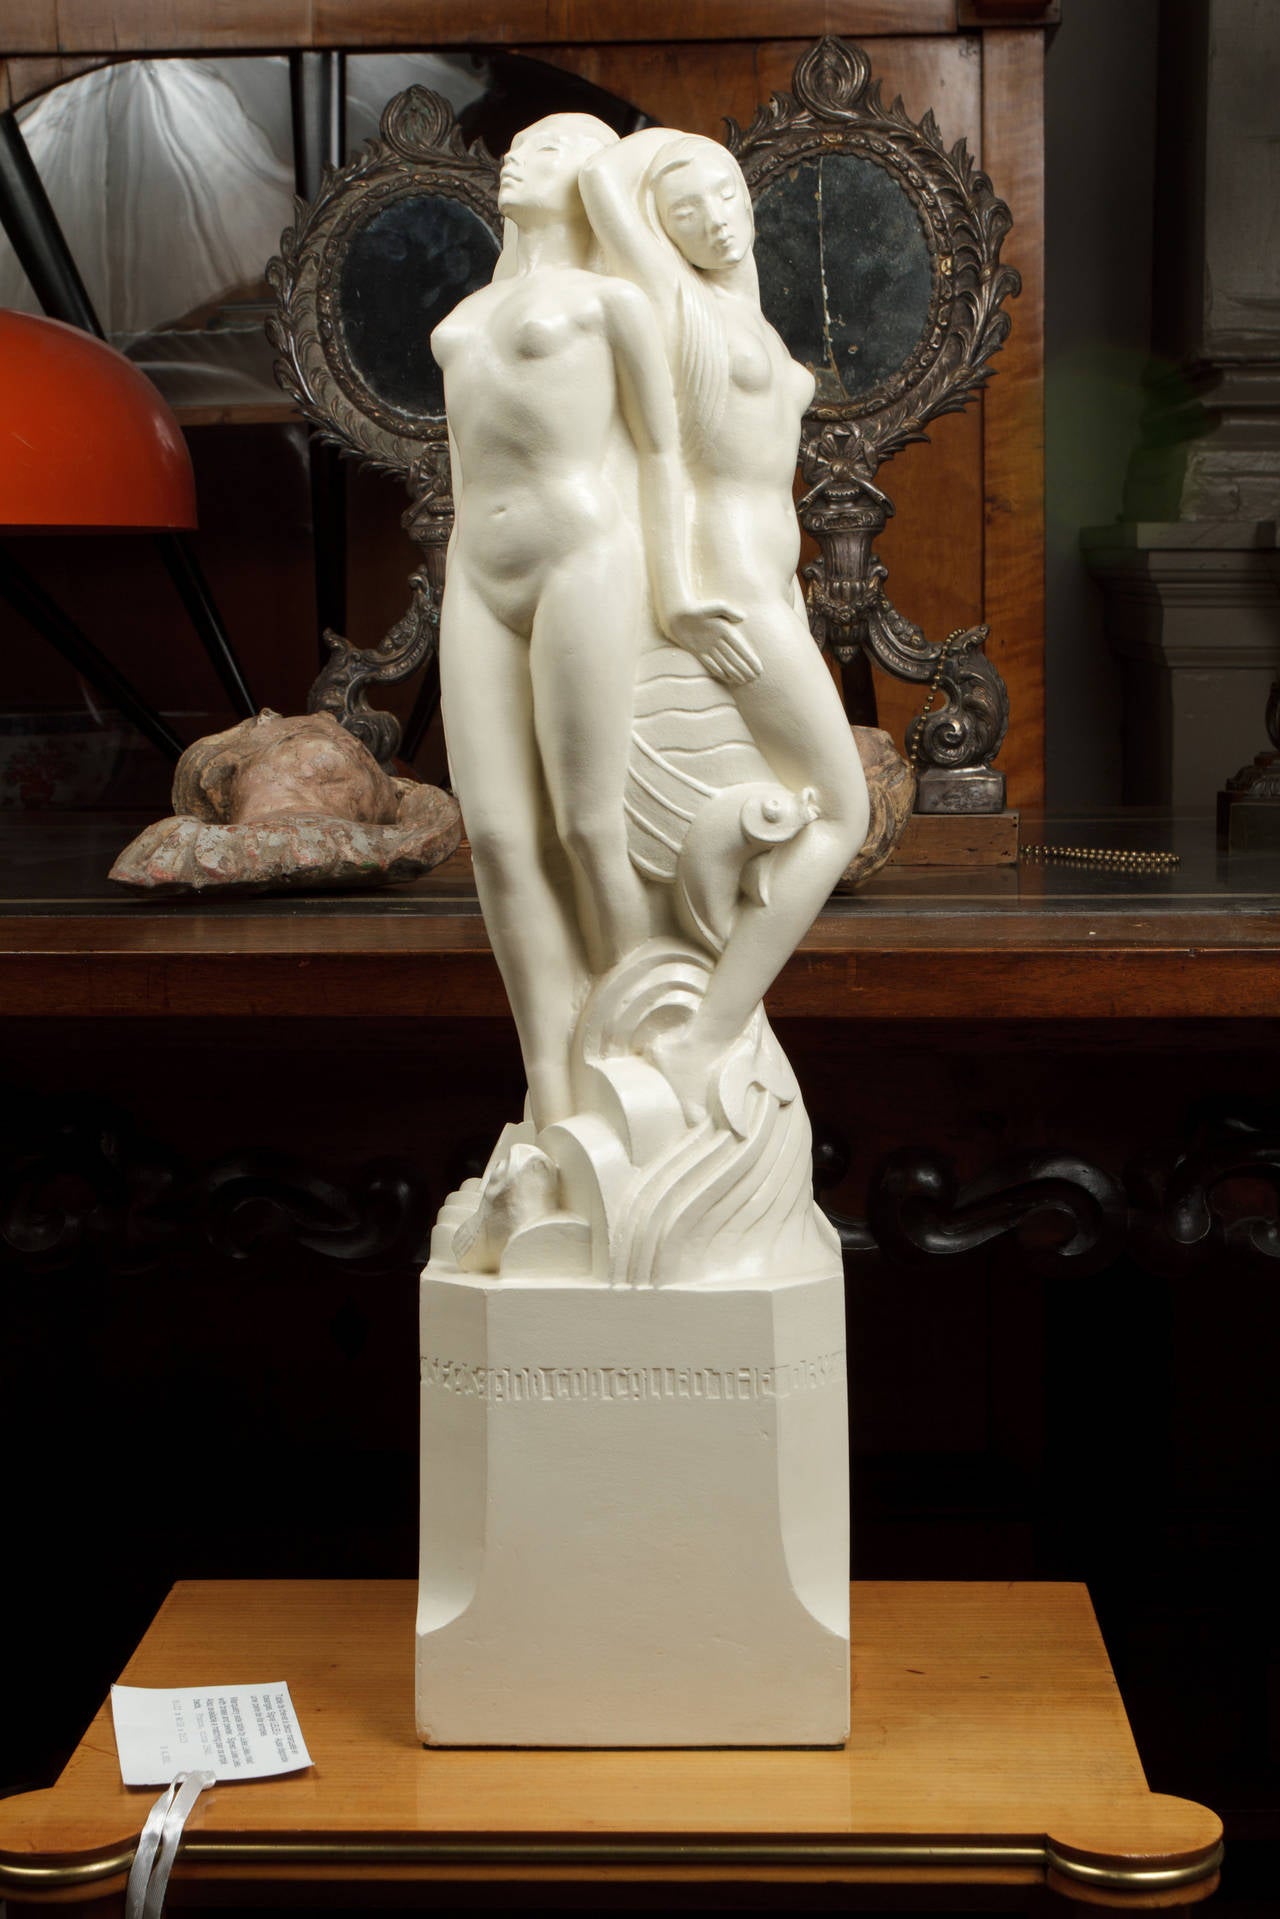 Mid-20th Century Plaster Art Deco Sculpture of a Group of Females Nudes by M.C. Toulmin